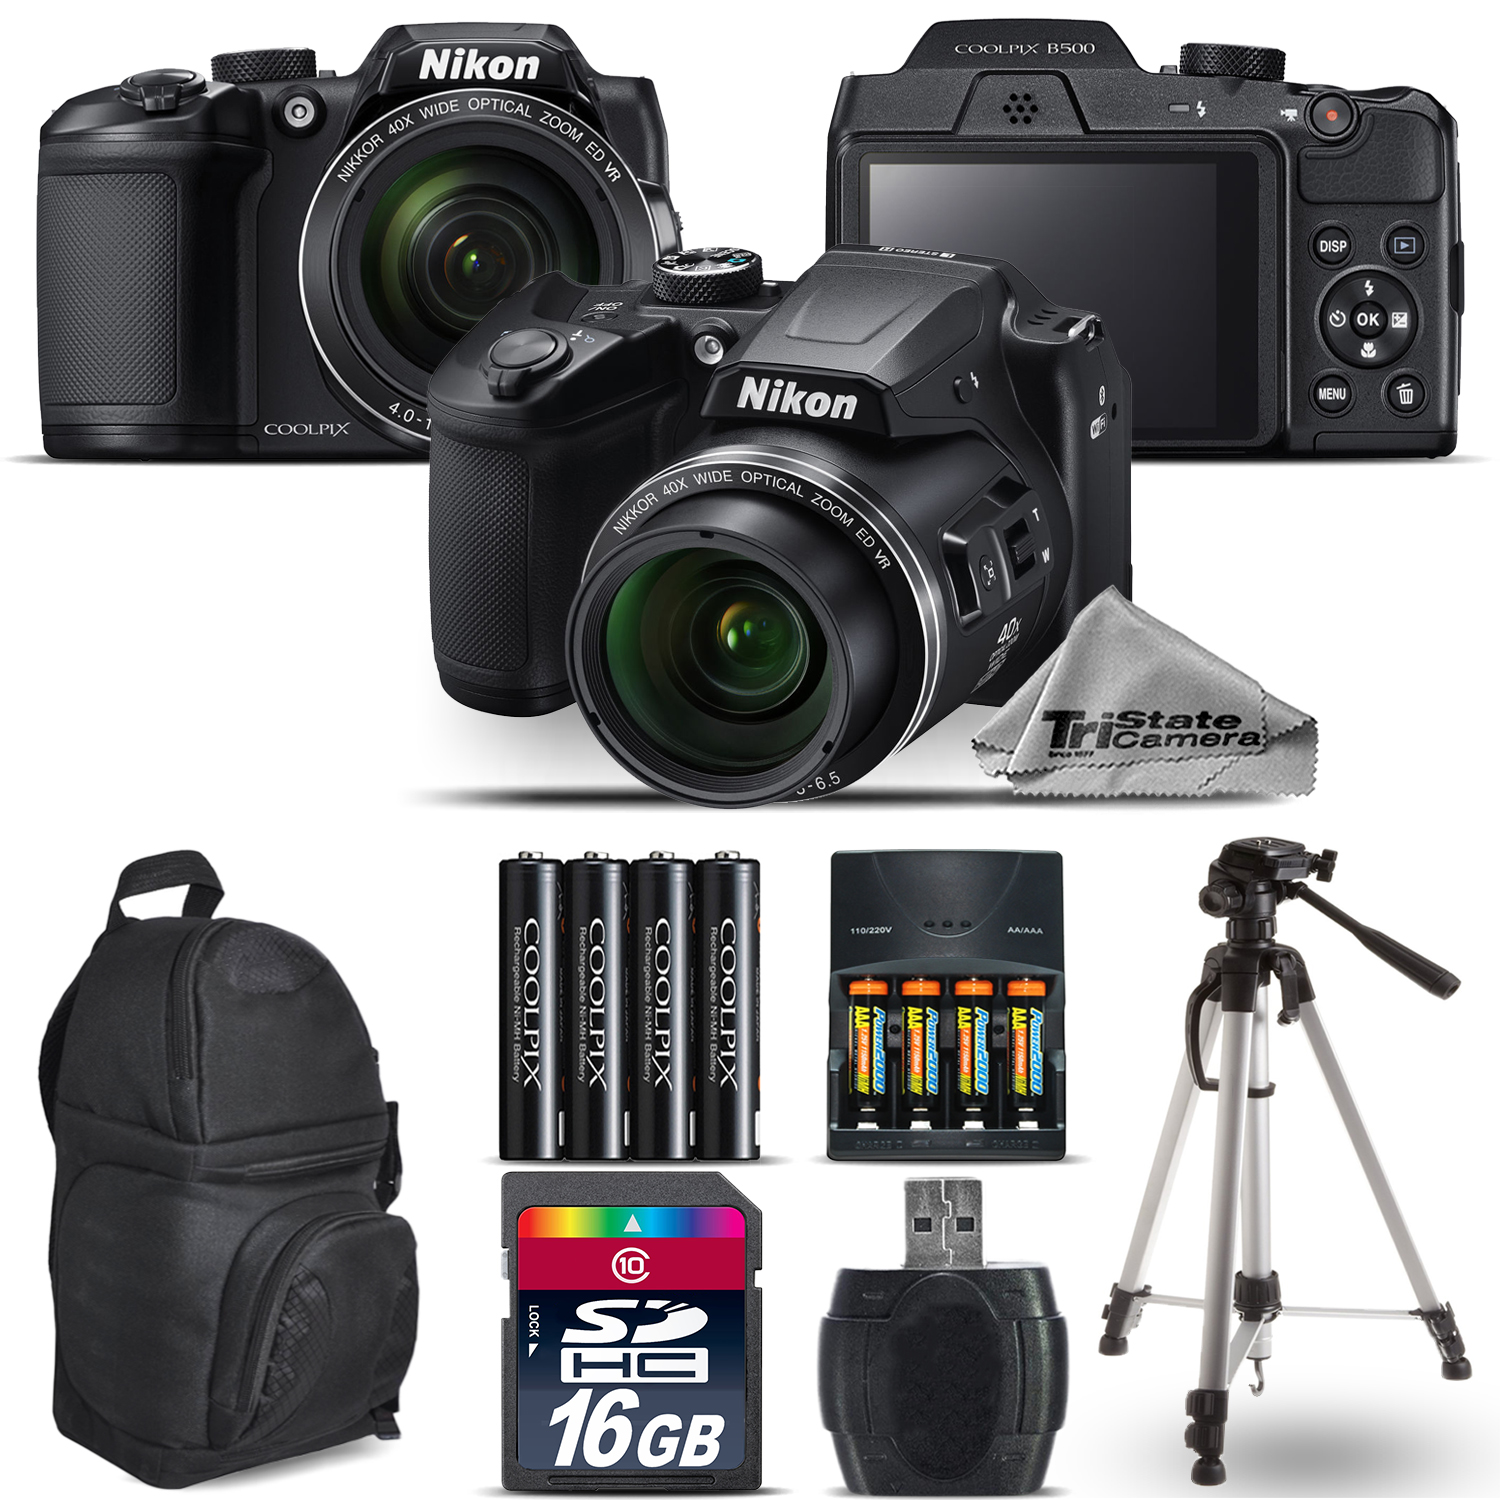 COOLPIX B500 Camera 40x Optical Zoom + Extra Battery + Backpack -16GB Kit *FREE SHIPPING*